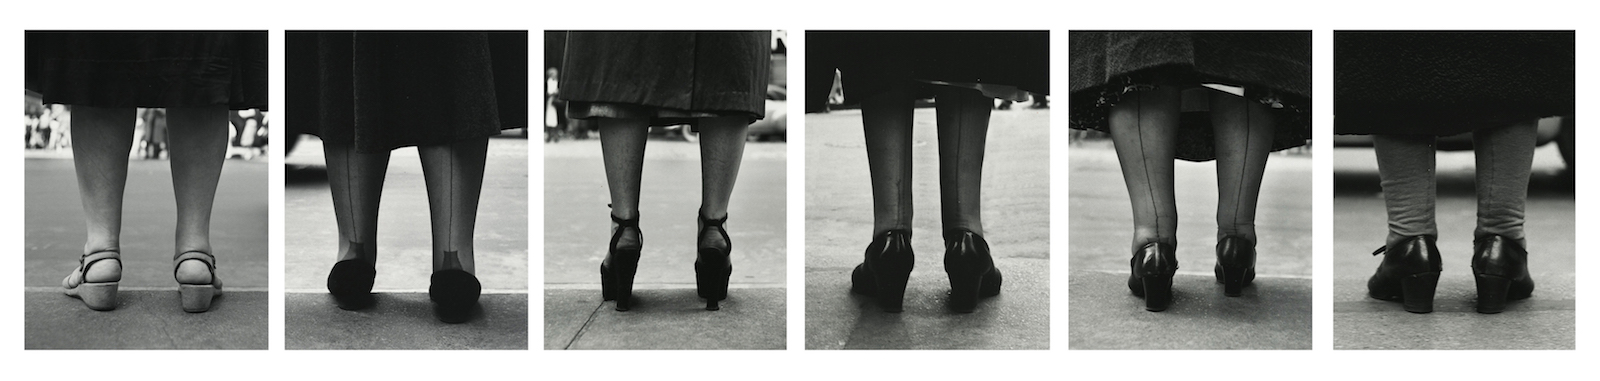 Legs, Wainting to Cross, Chicago, 1951